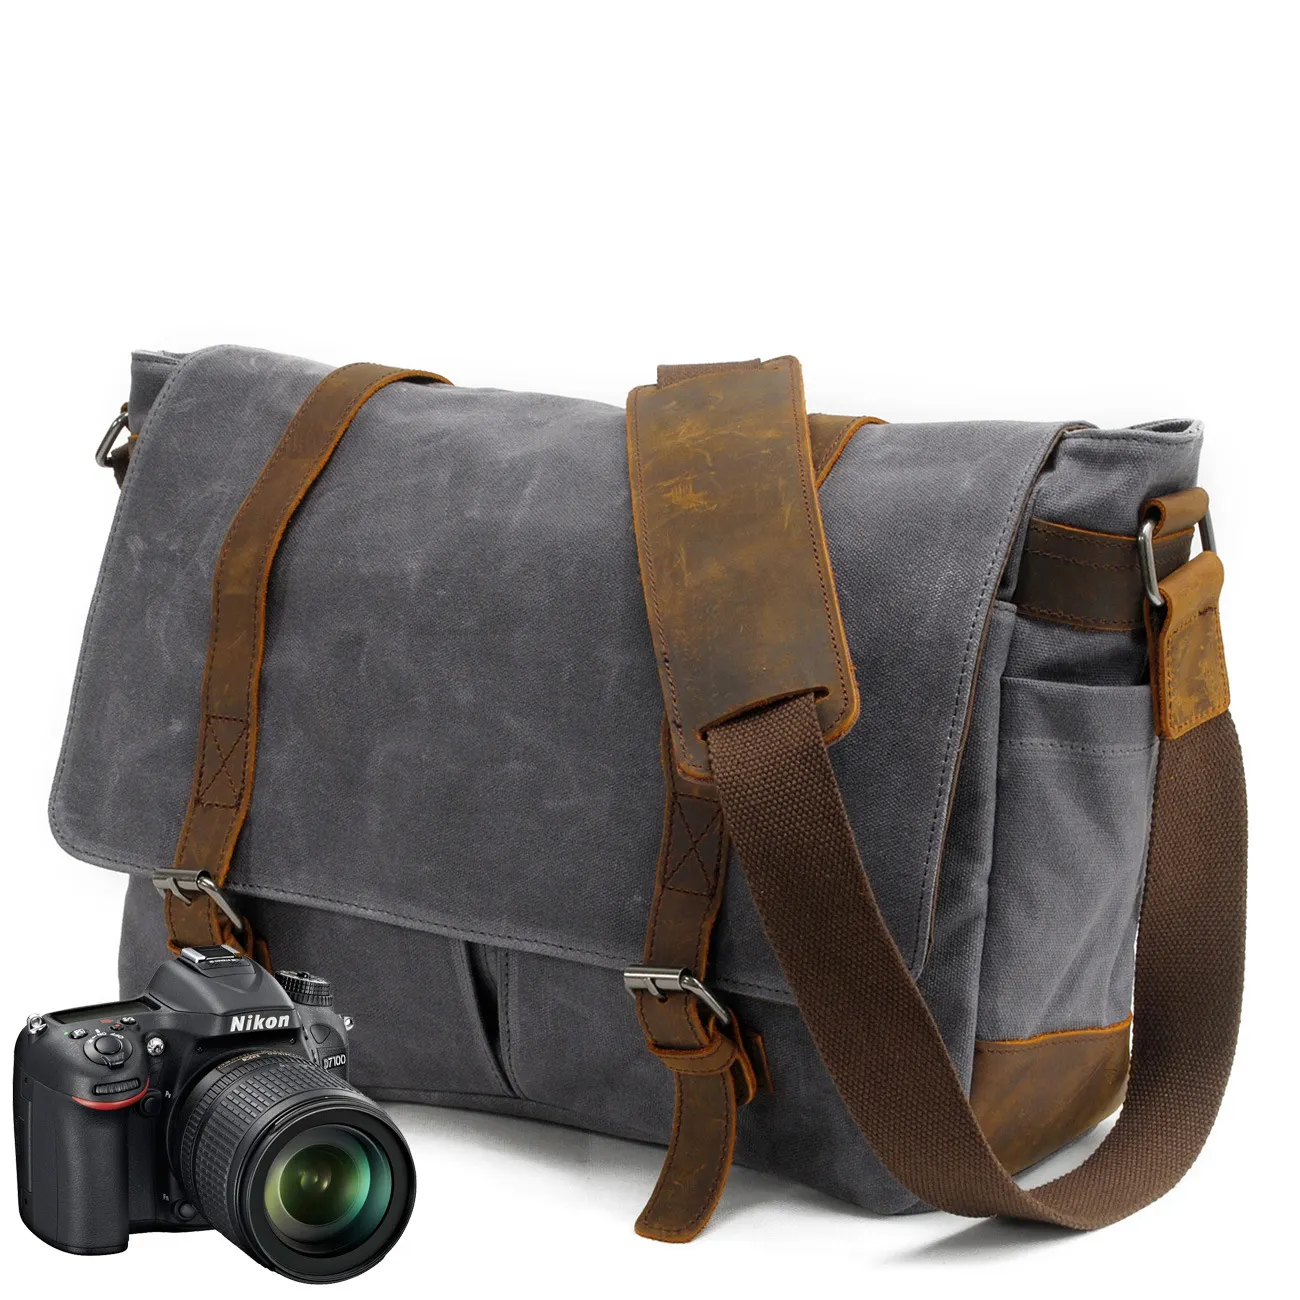 F 16930ND New Arrival Large Shoulder Laptop Bags Waterproof Waxed Canvas Camera Bags